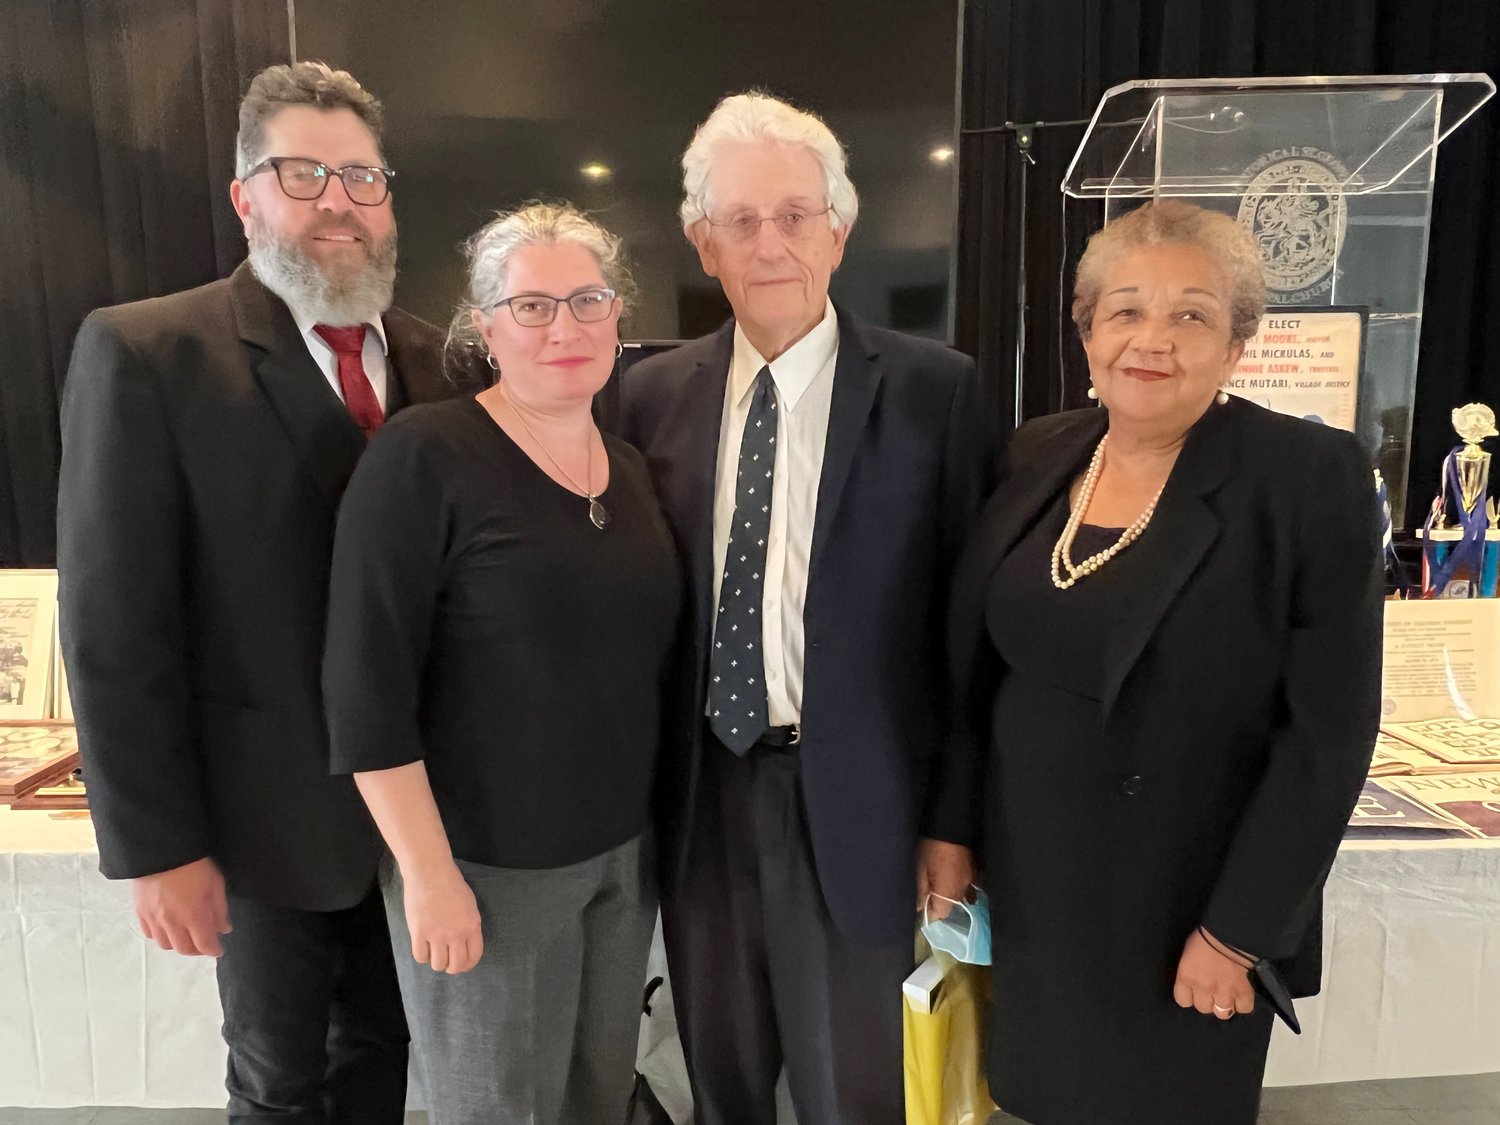 Pat’s Canadian relatives, Mark, Sarah, and Julian Vaughan-Jackson, met her Hempstead friends and neighbors at the memorial celebration. Shown with them at right is Christina Lightbourne, a warden of St. John the Evangelist Church in Lynbrook.